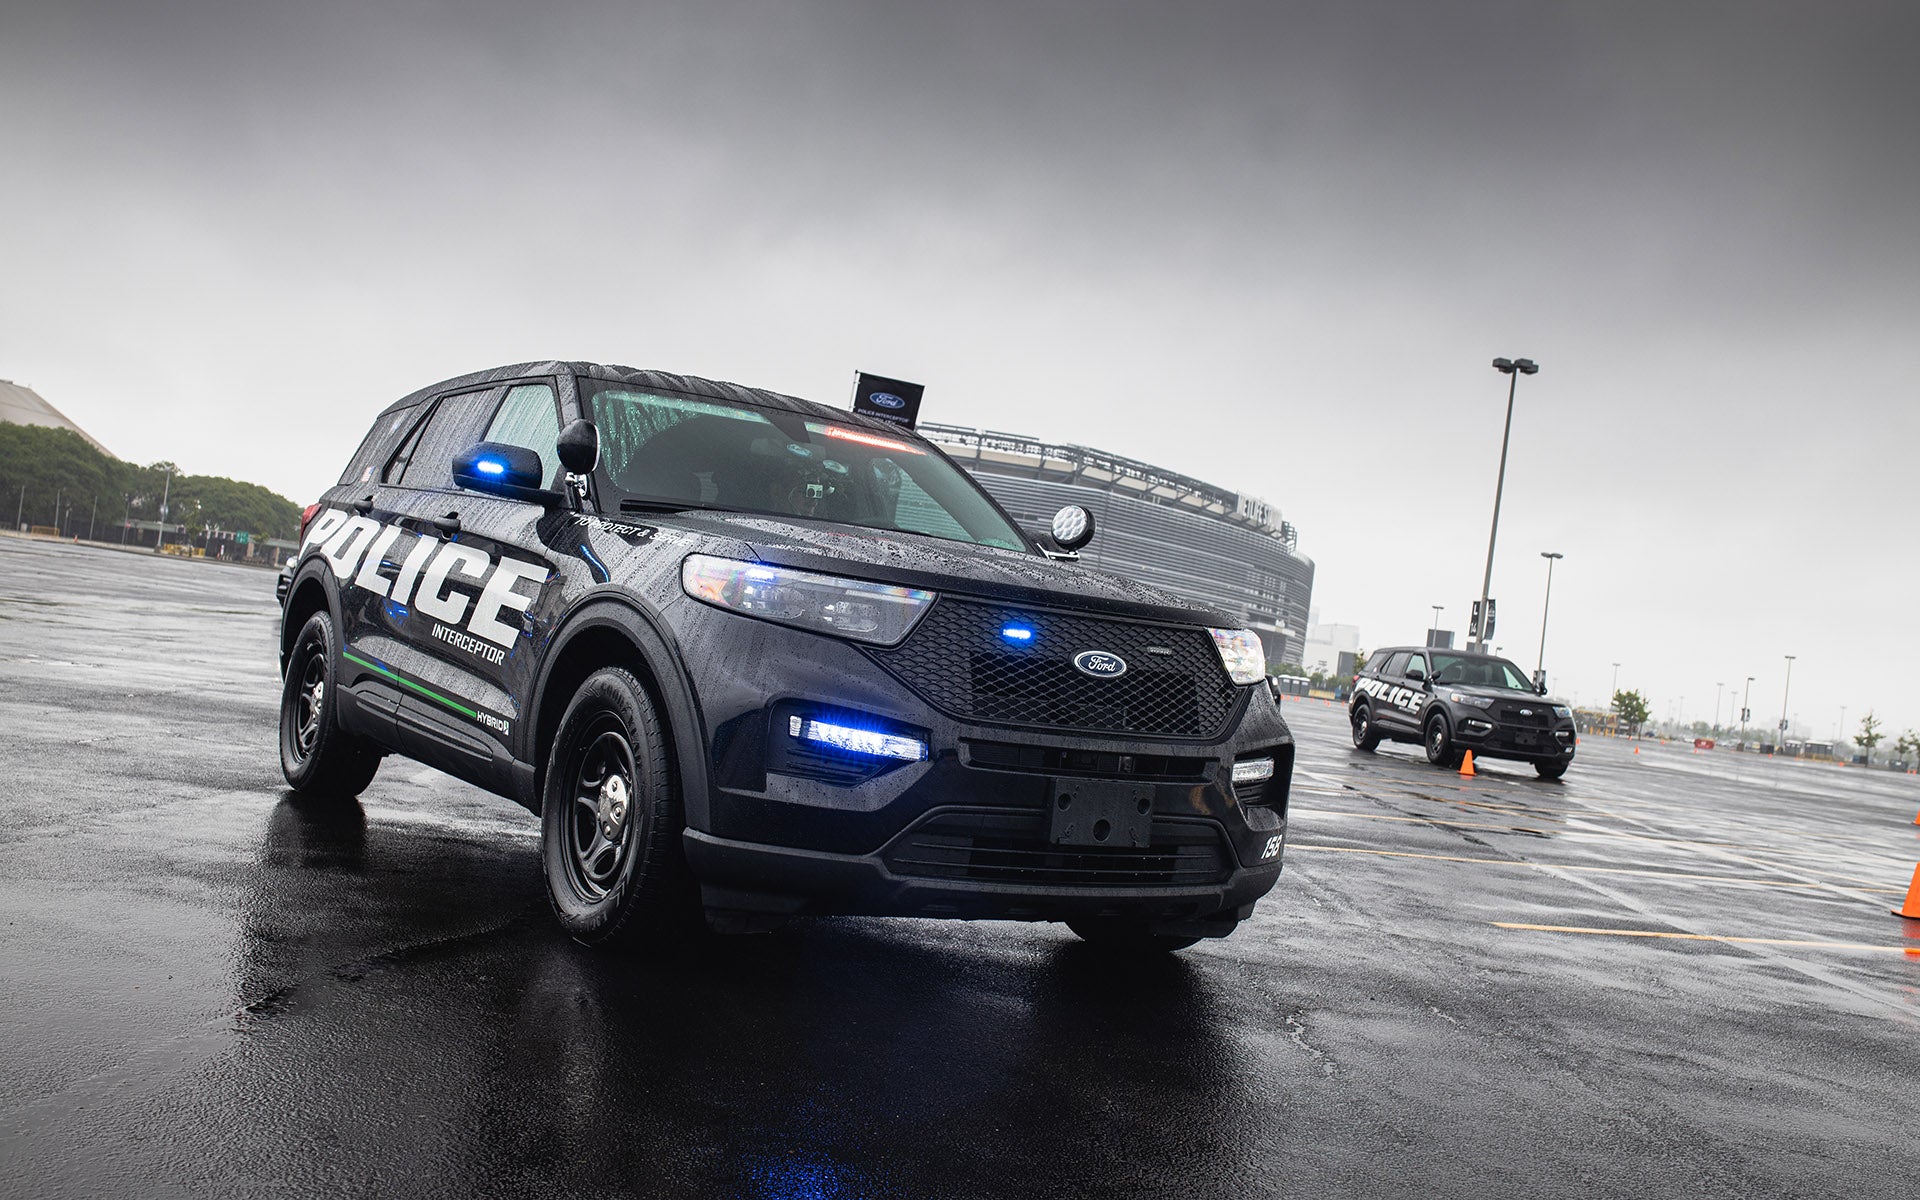 2020 Ford Explorer Police Interceptor Utility Review Coming To A Rear View Mirror Near You